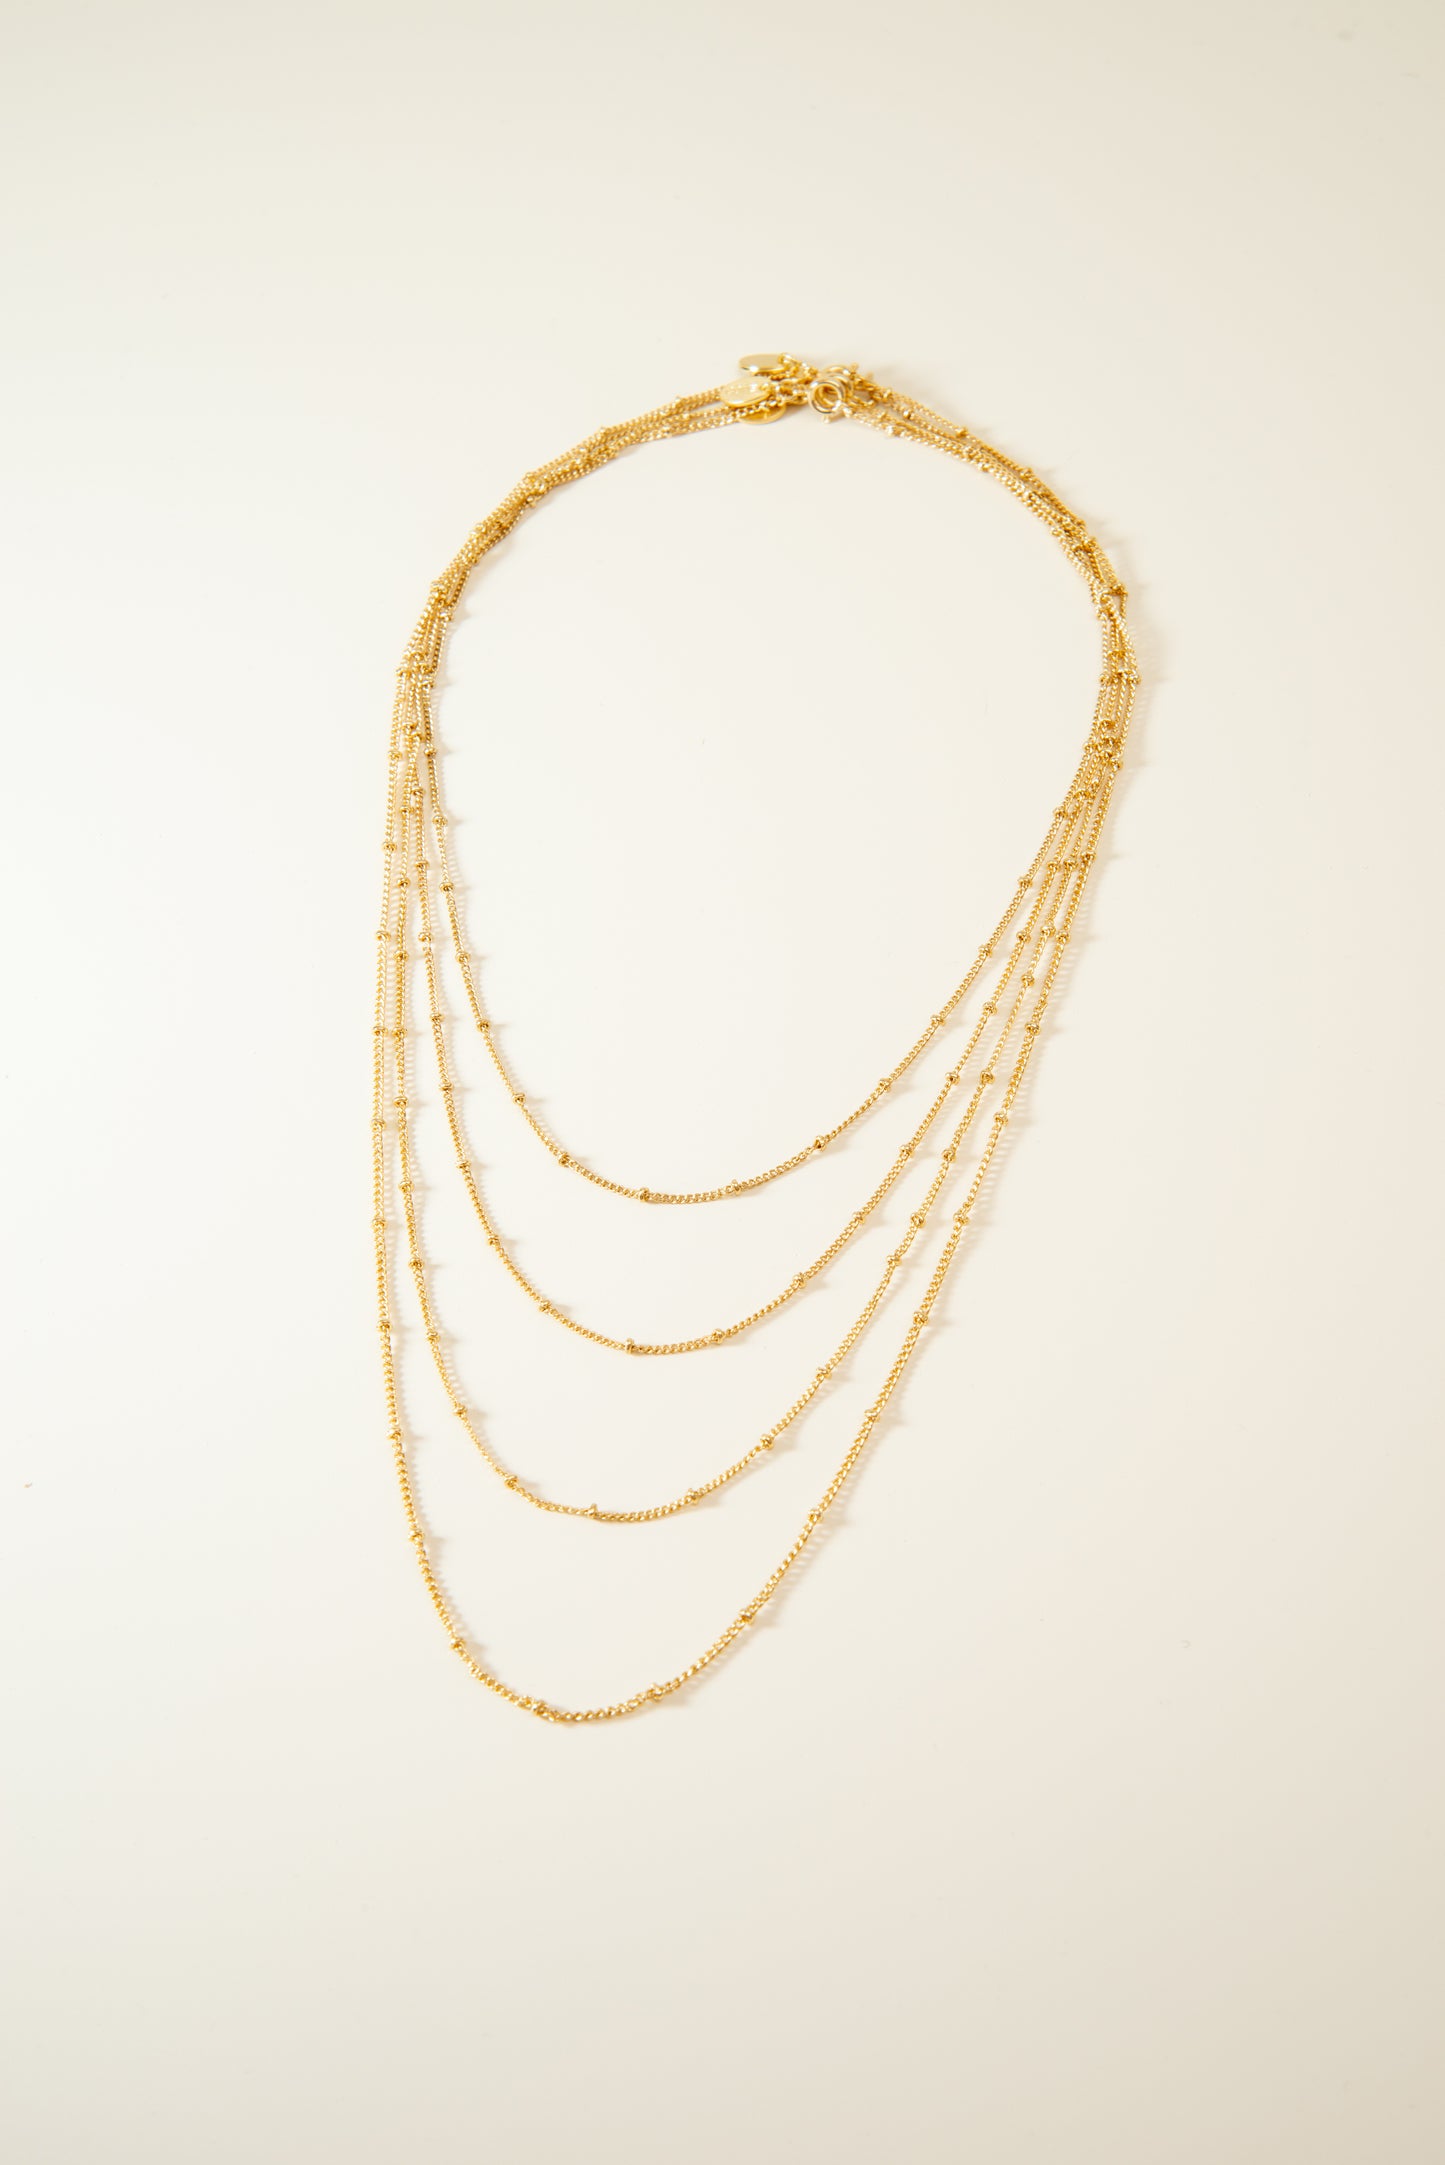 Beaded Gold Chain